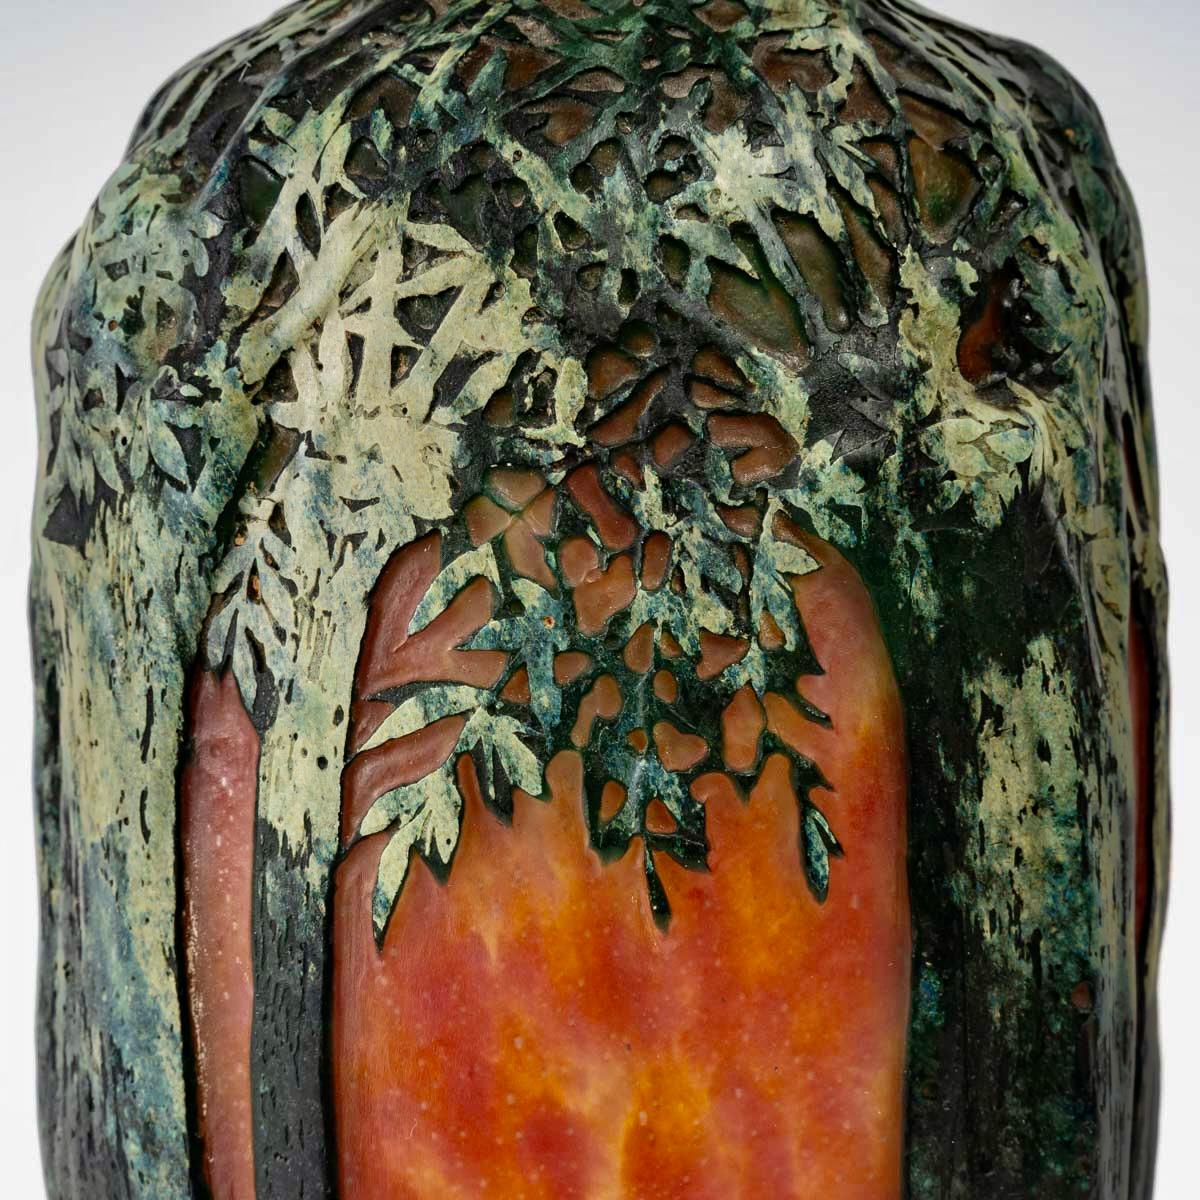 Multilayer blown glass vase decorated with trees in relief and a village cleared with acid and taken up with a wheel on a background of green, yellow and orange interlayer powders created by Daum between 1900 and 1905.

Engraved signature.

Perfect